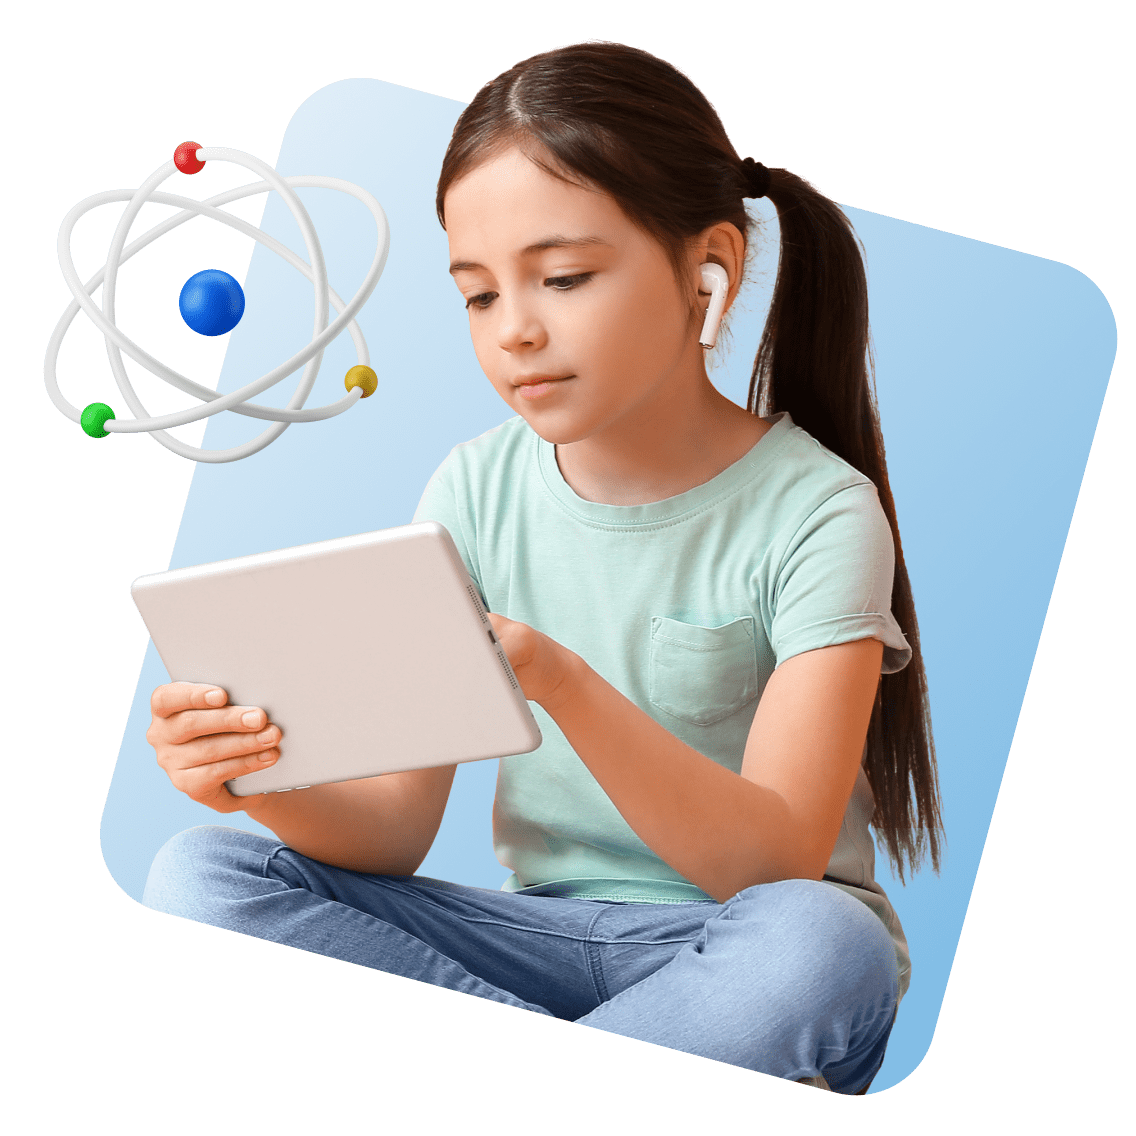 Texas Online Schools image 1 (name 3 Young Girl Tablet Airpods Science 3)